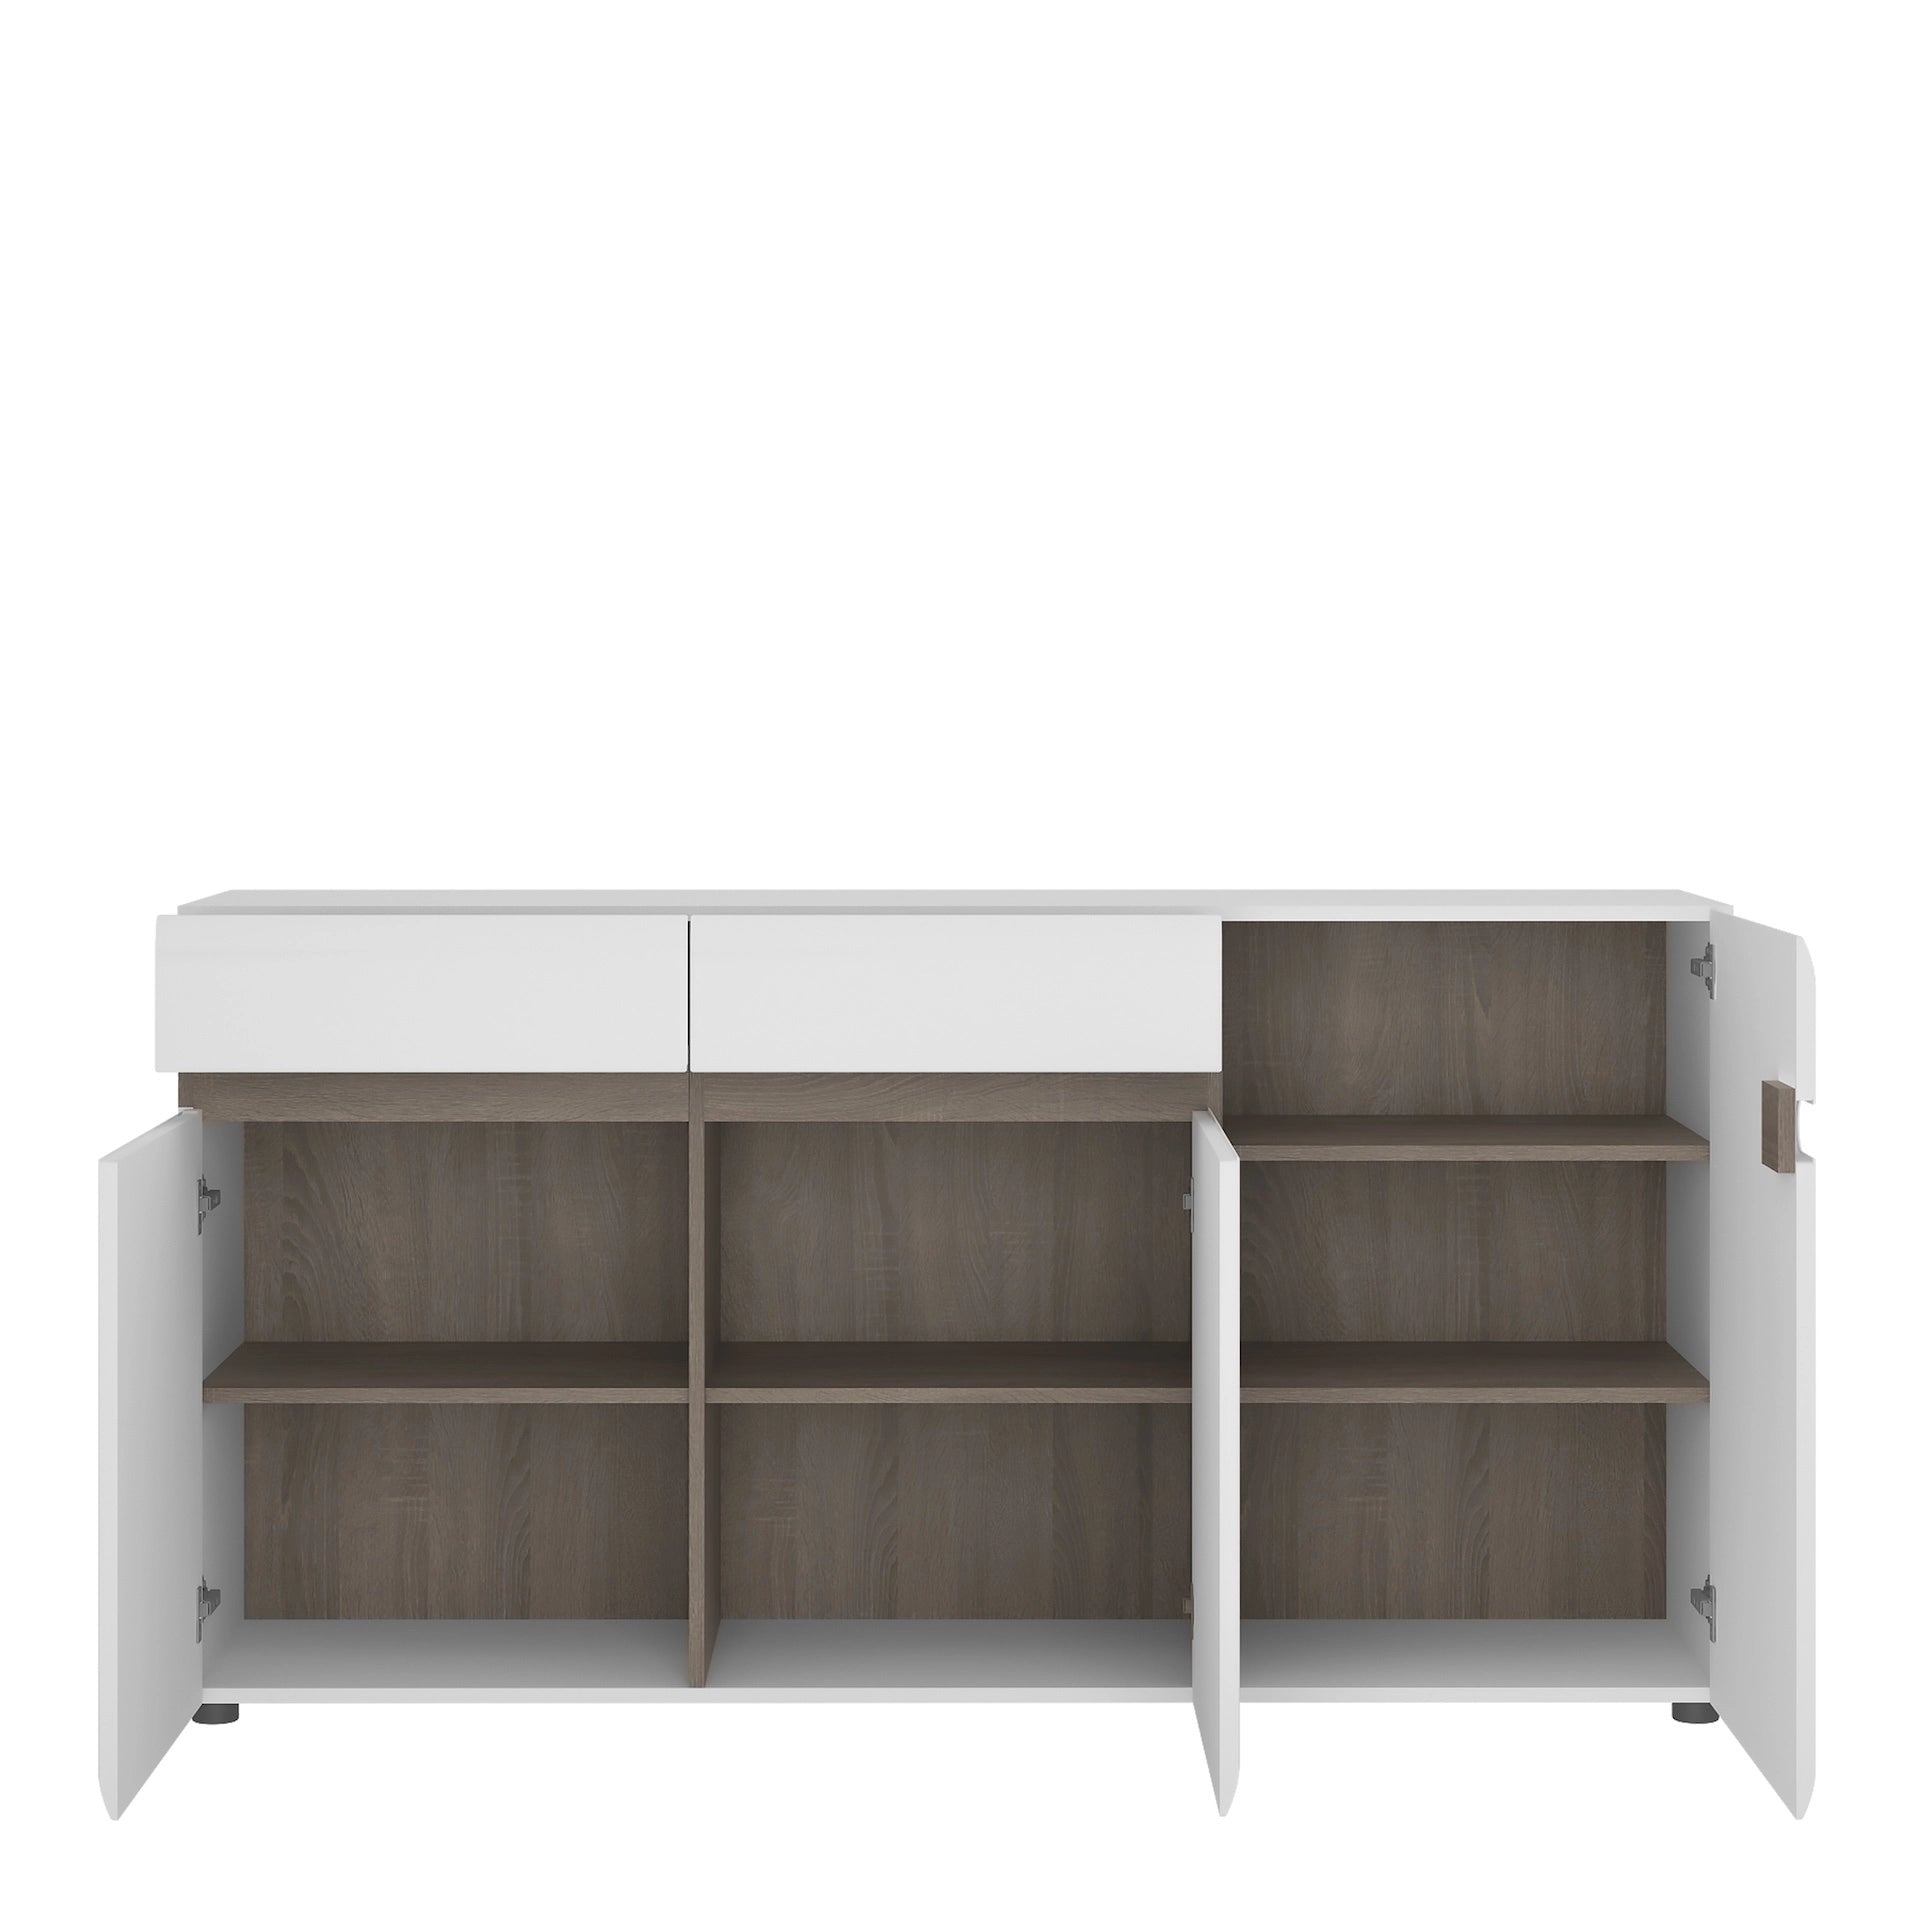 Furniture To Go Chelsea 2 Drawer 3 Door Sideboard in White with Oak Trim